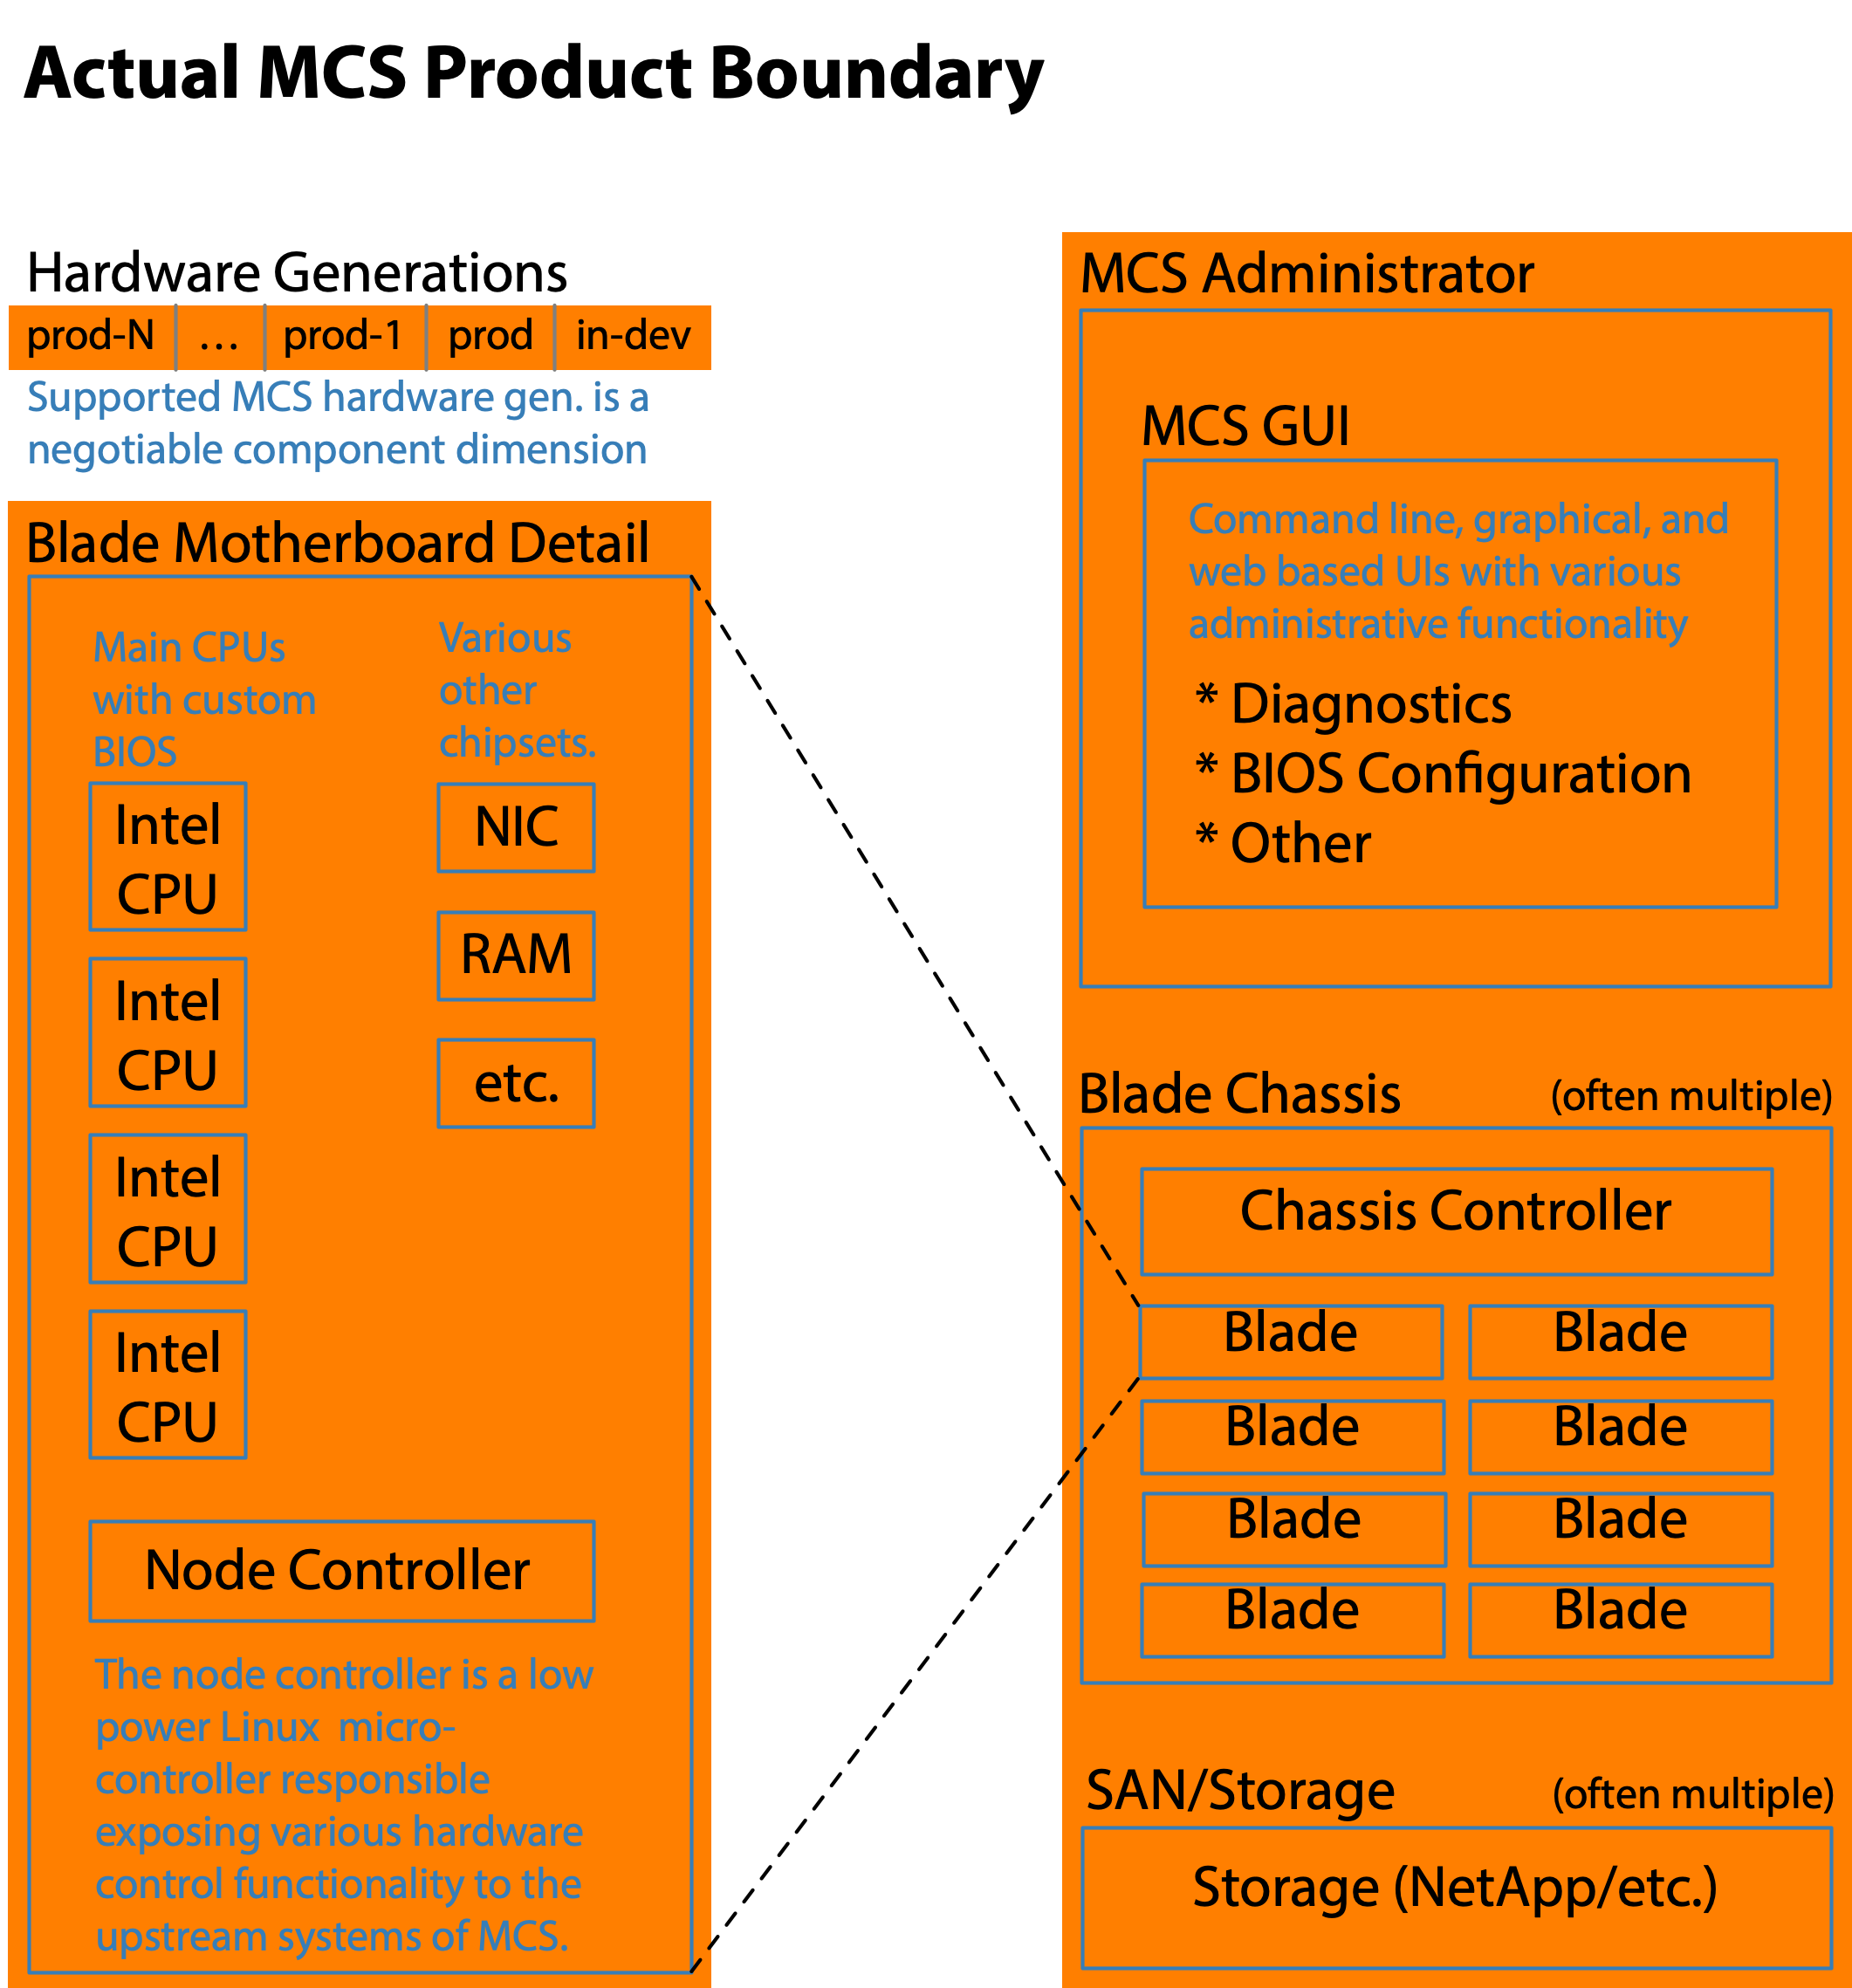 Actual MCS Product Boundary